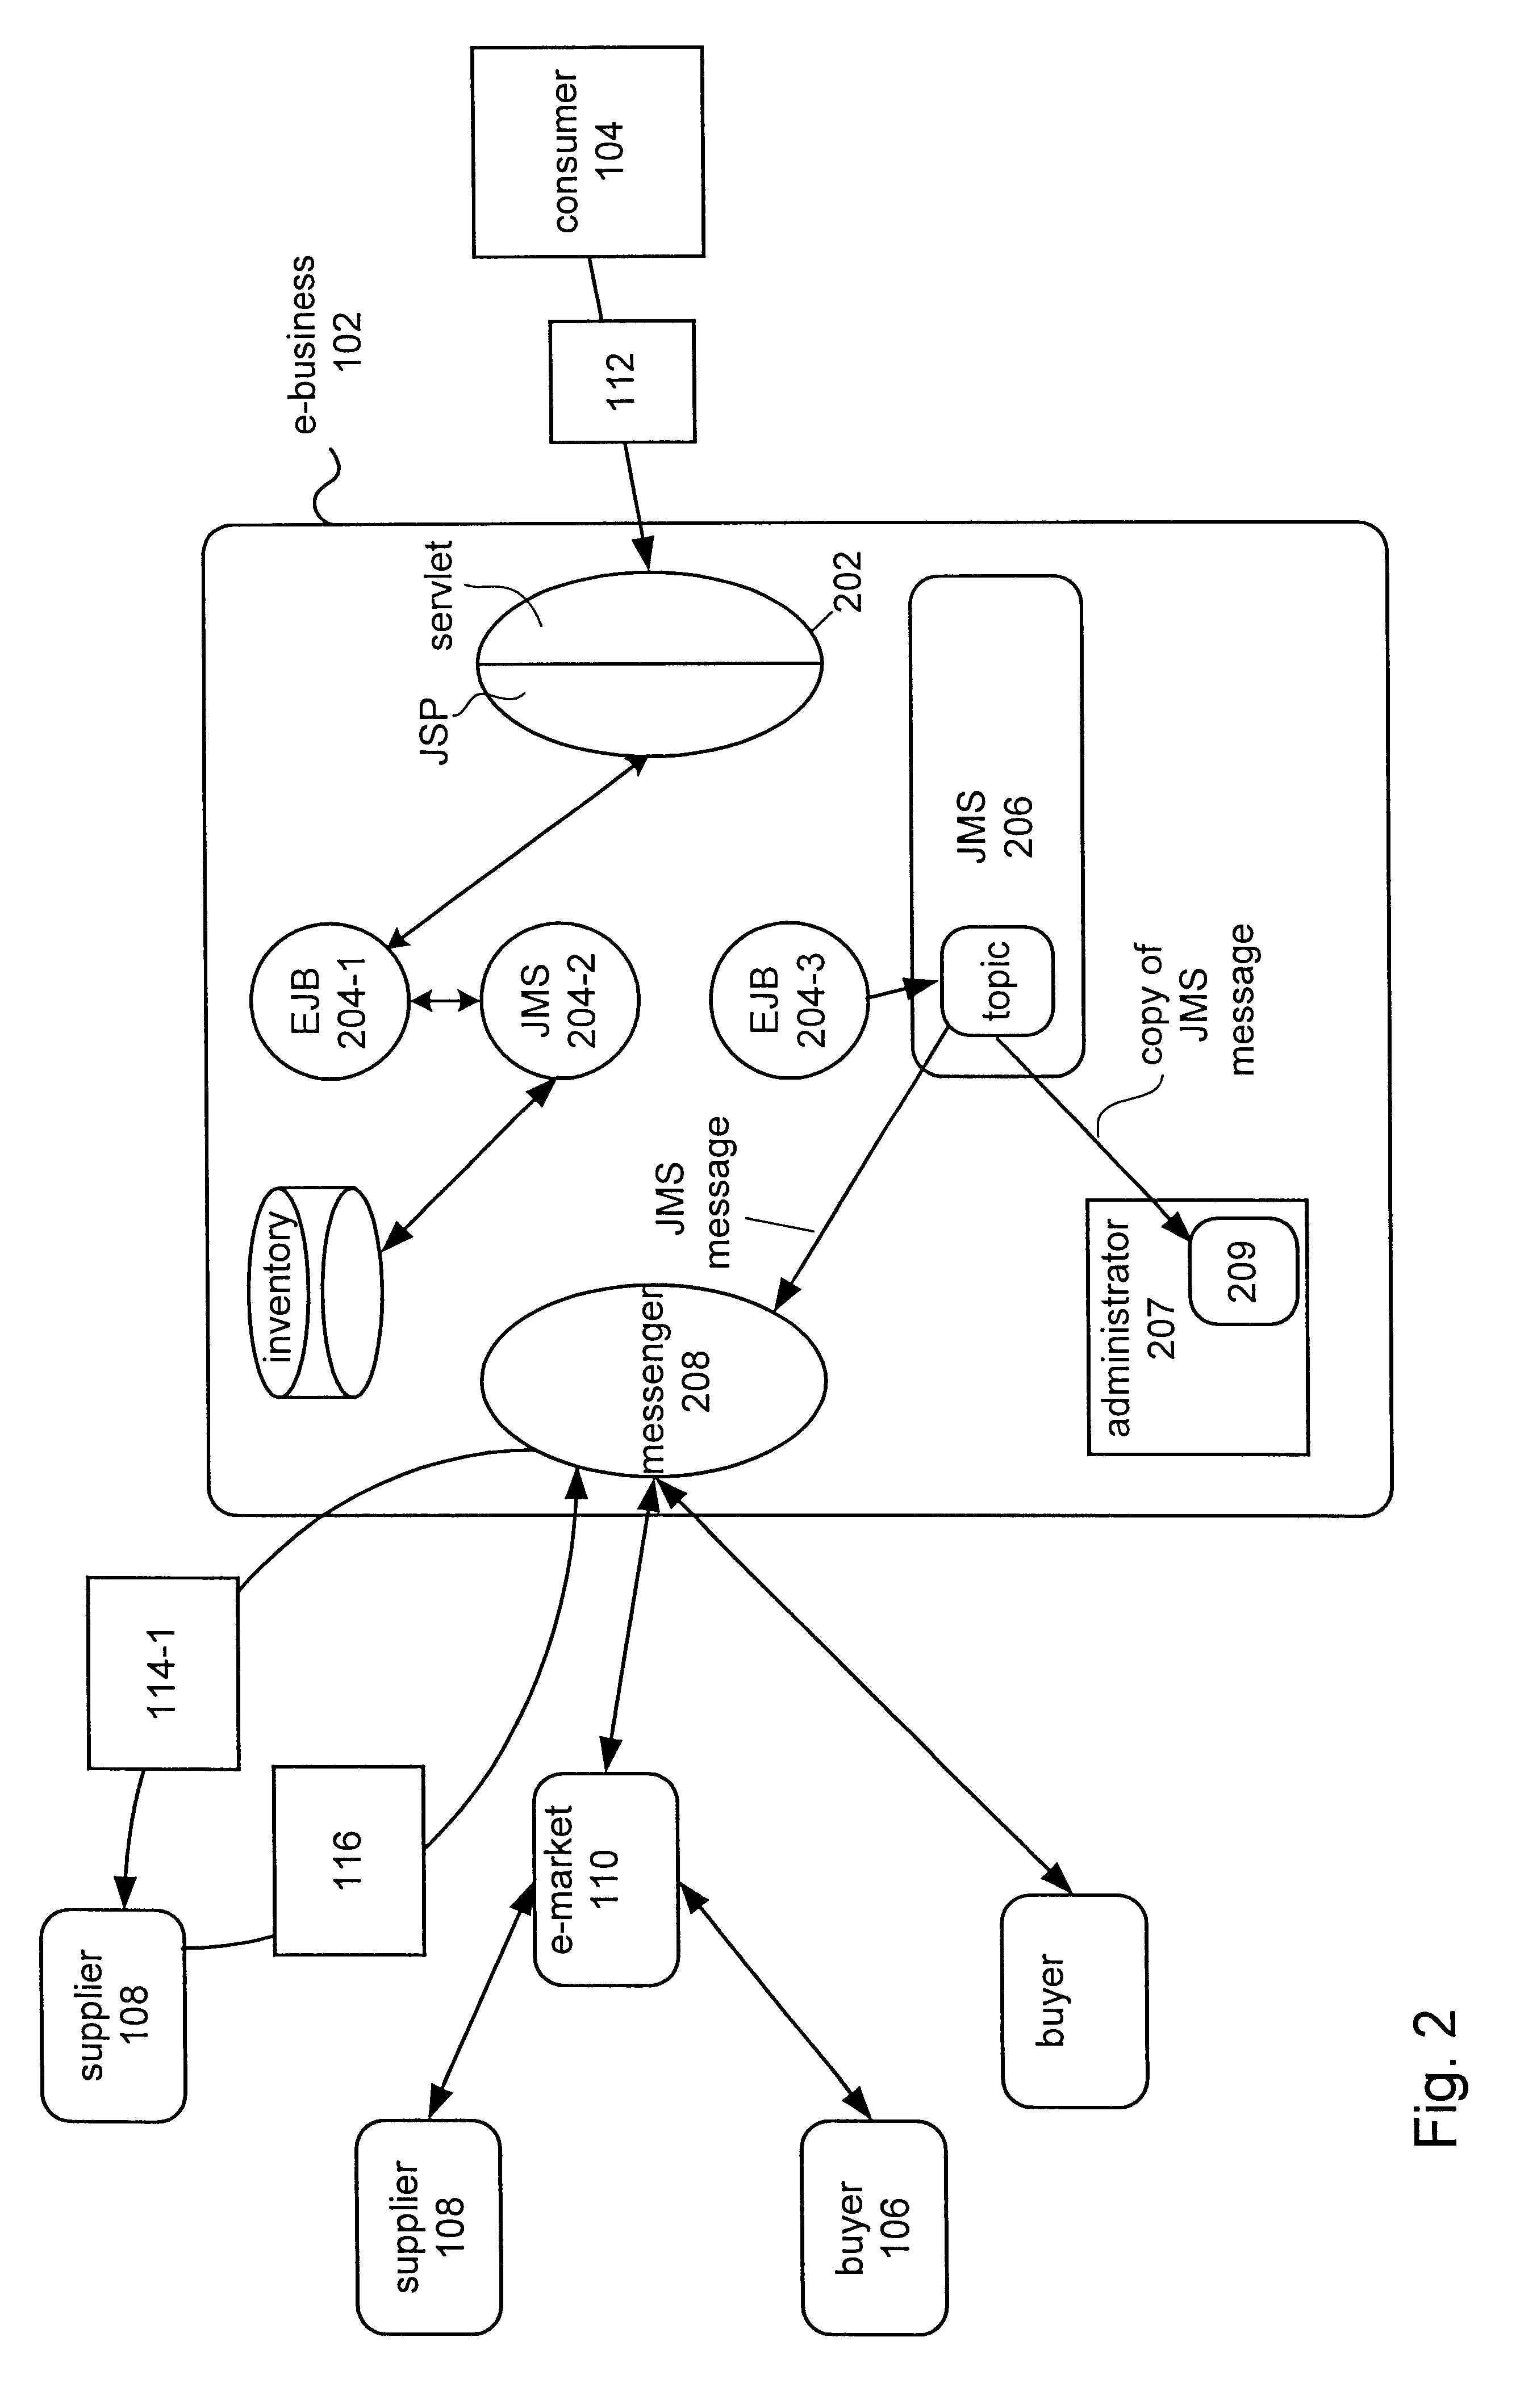 Techniques for preventing information loss in a business to business message in an enterprise computer system